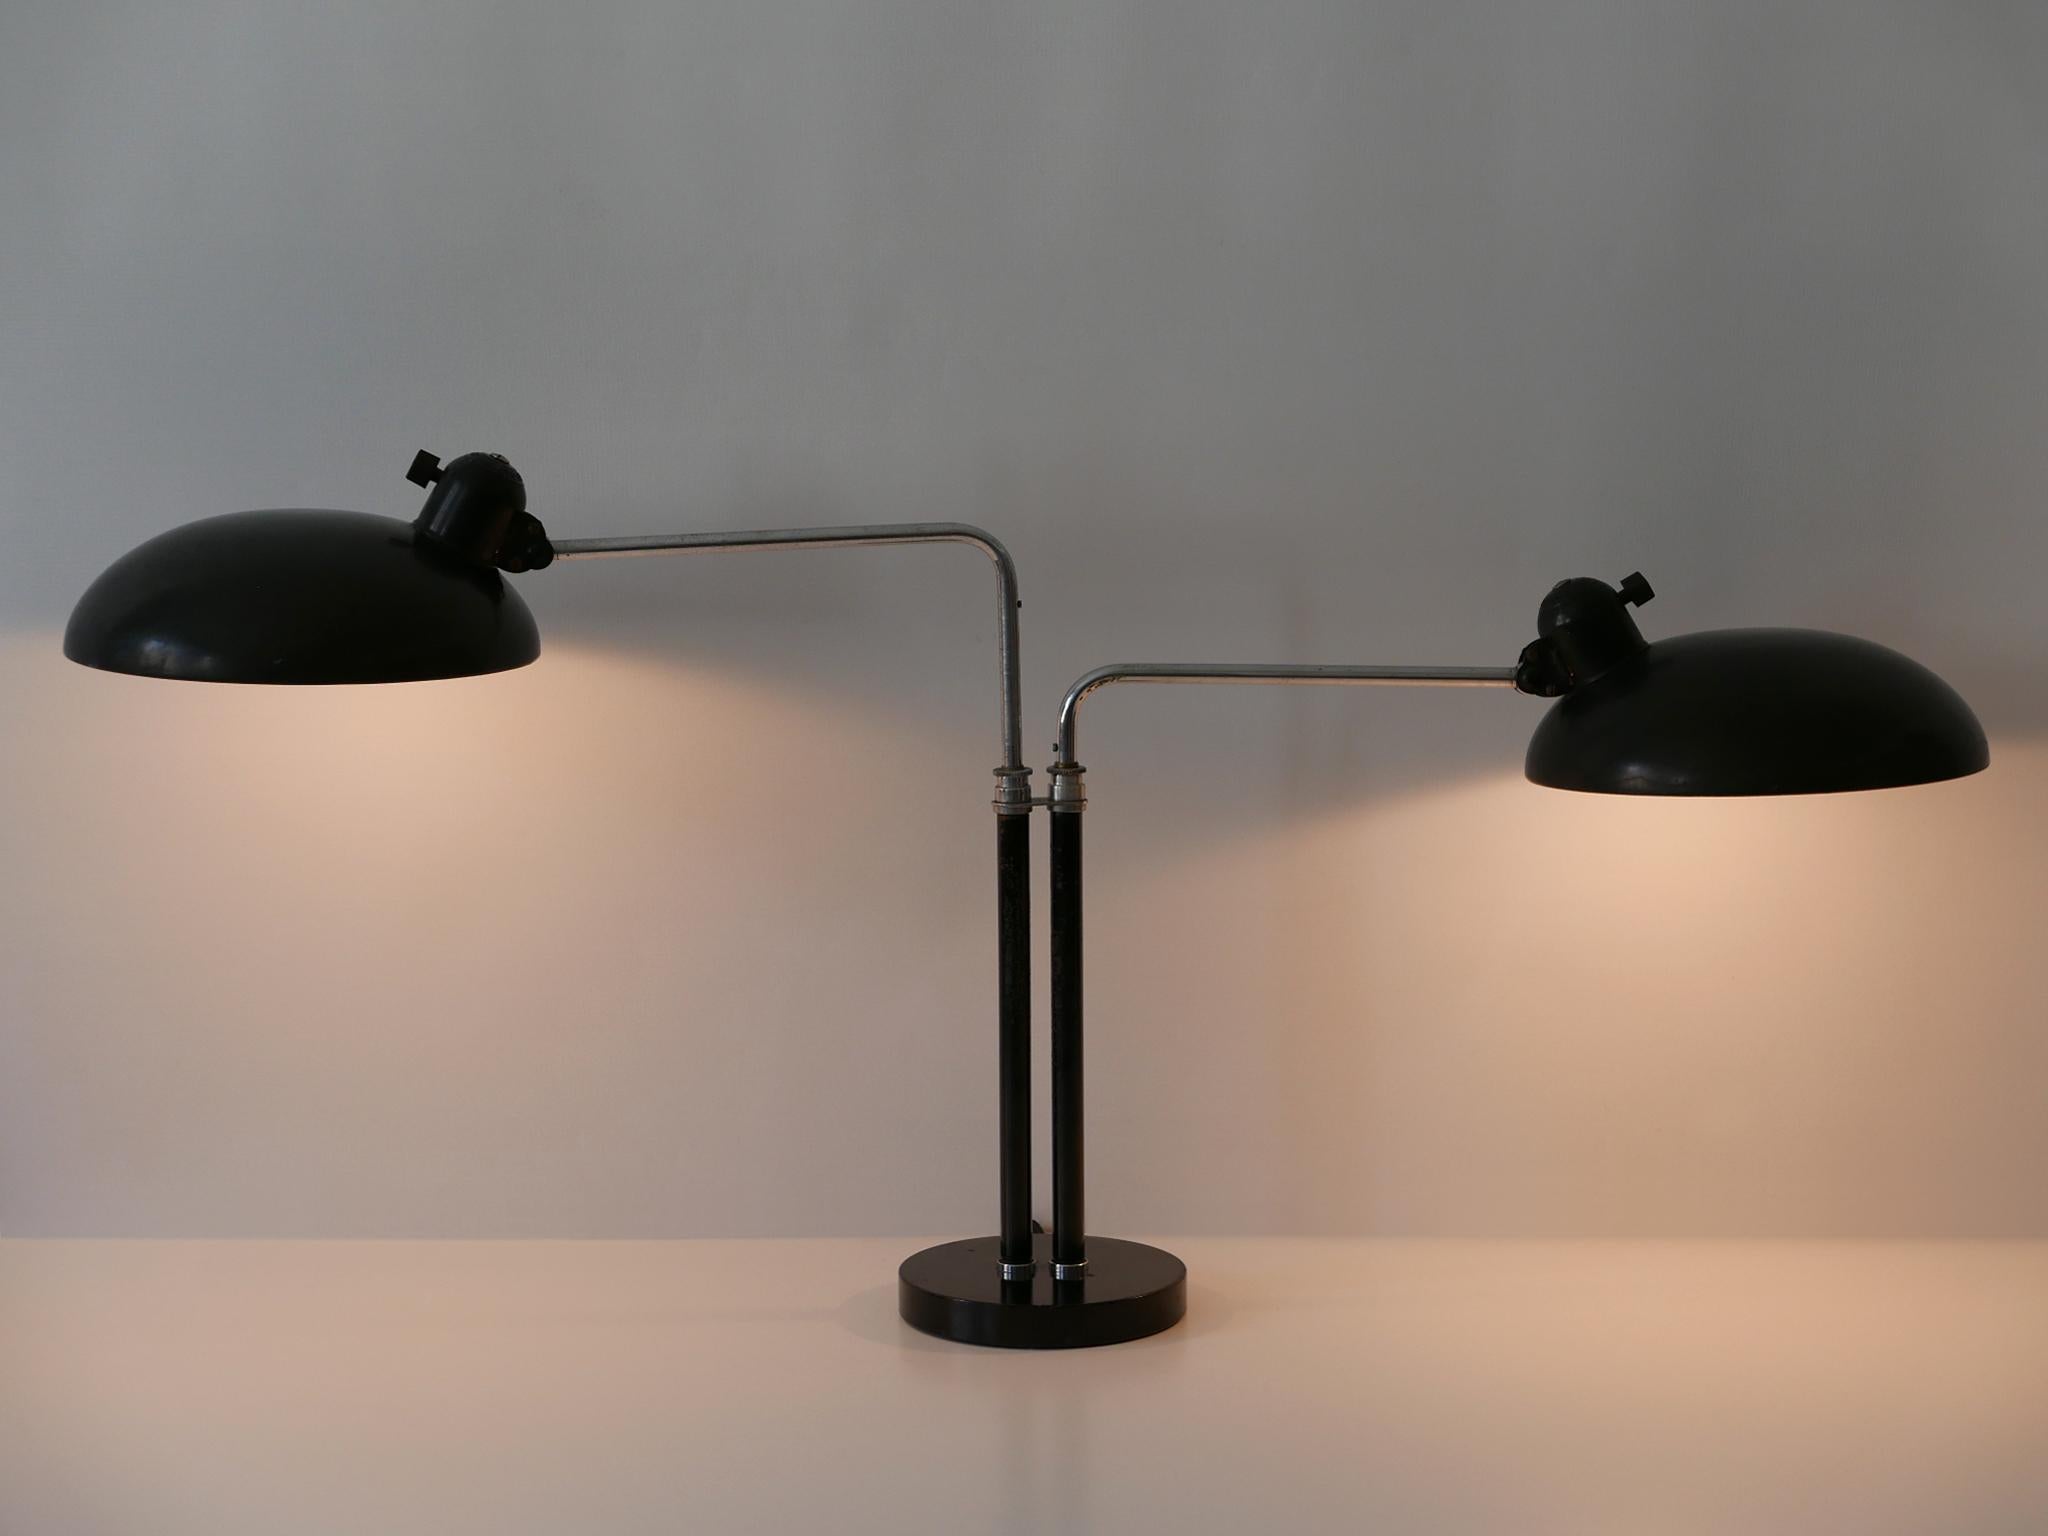 Spectacular, extra large two-armed Bauhaus / Modernist table lamp or desk light. Model 6660 Super. Adjustable and rotating arms and shades. Designed by Christian Dell for Kaiser Idell, 1930s, Germany. Makers mark on the top of the each lamp